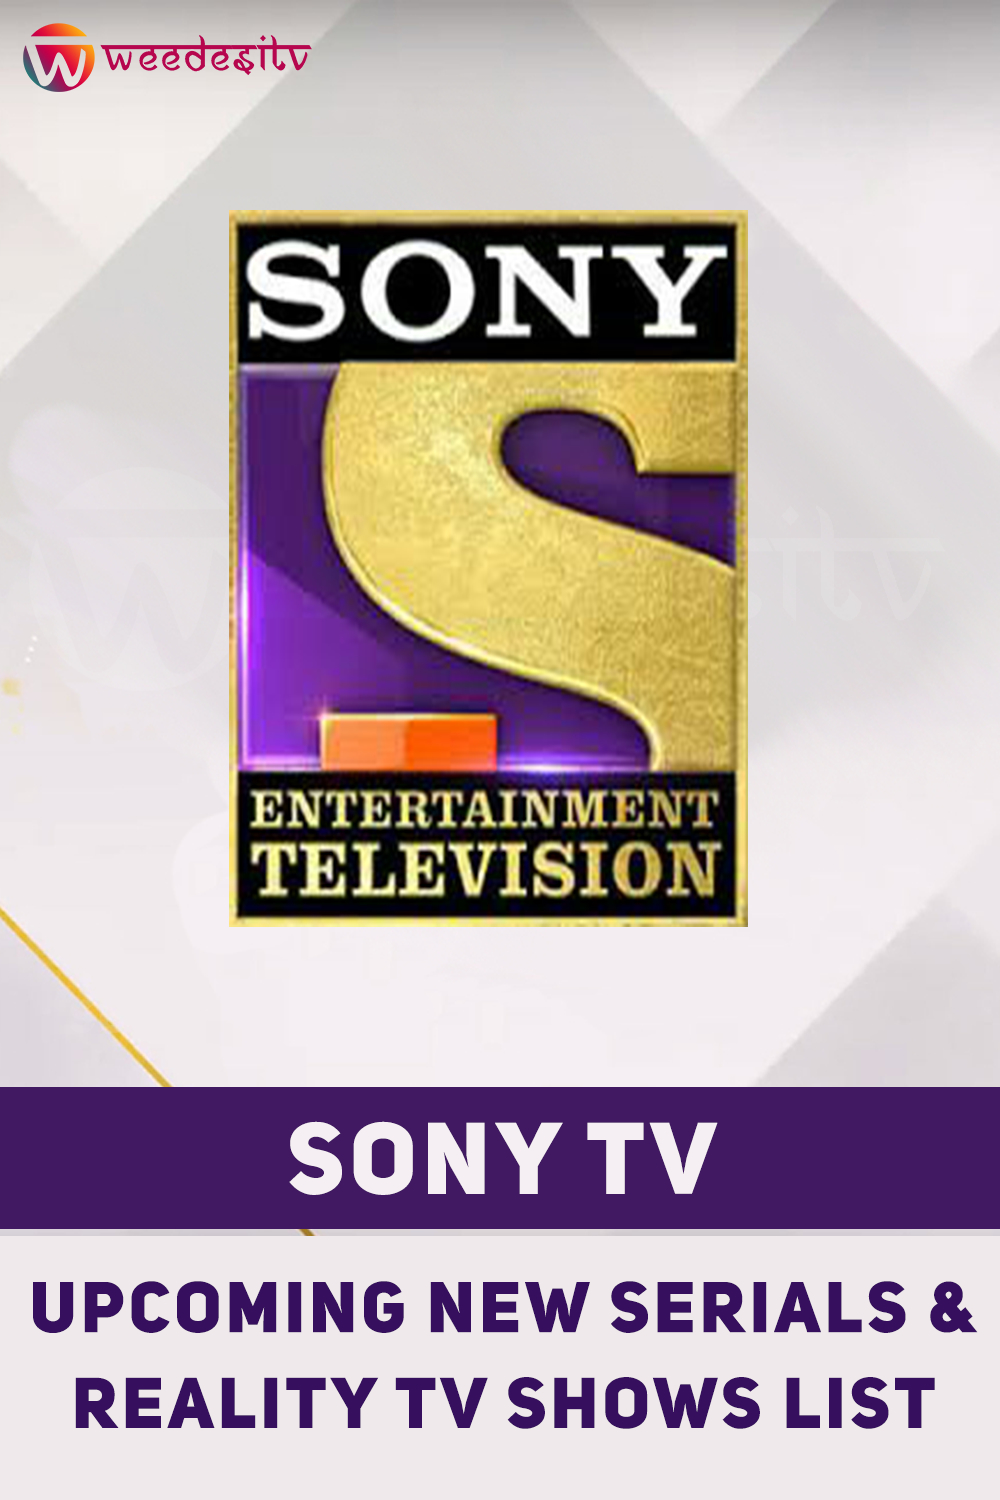 sony tv new serials and upcoming reality tv shows by WeedesiTV